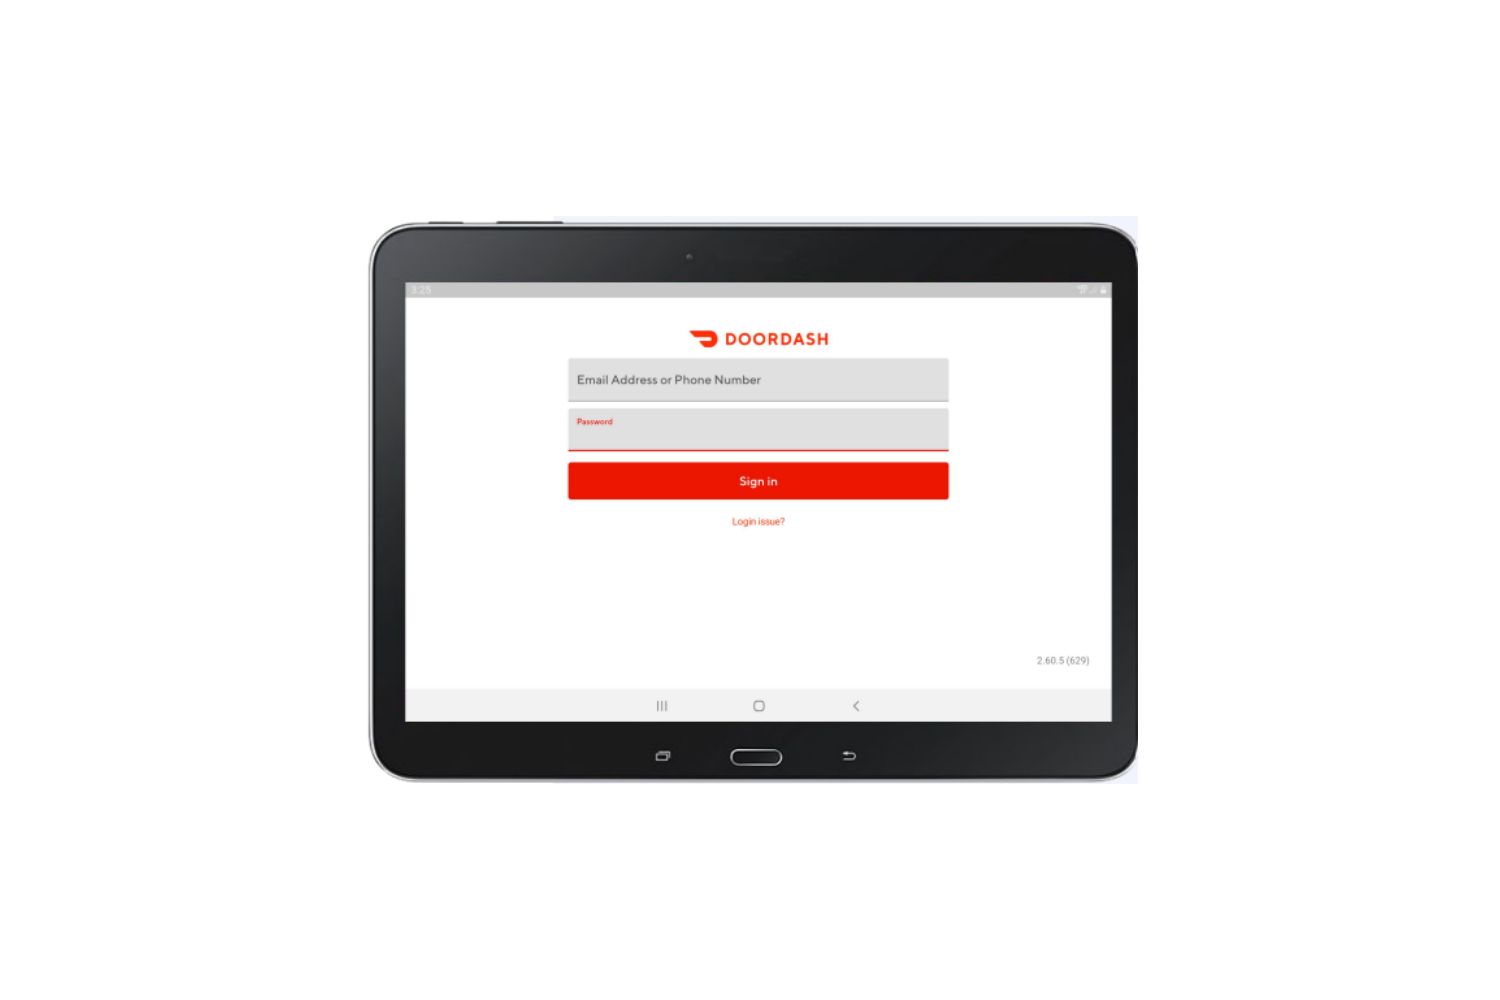 How To Remove Doordash From Tablet